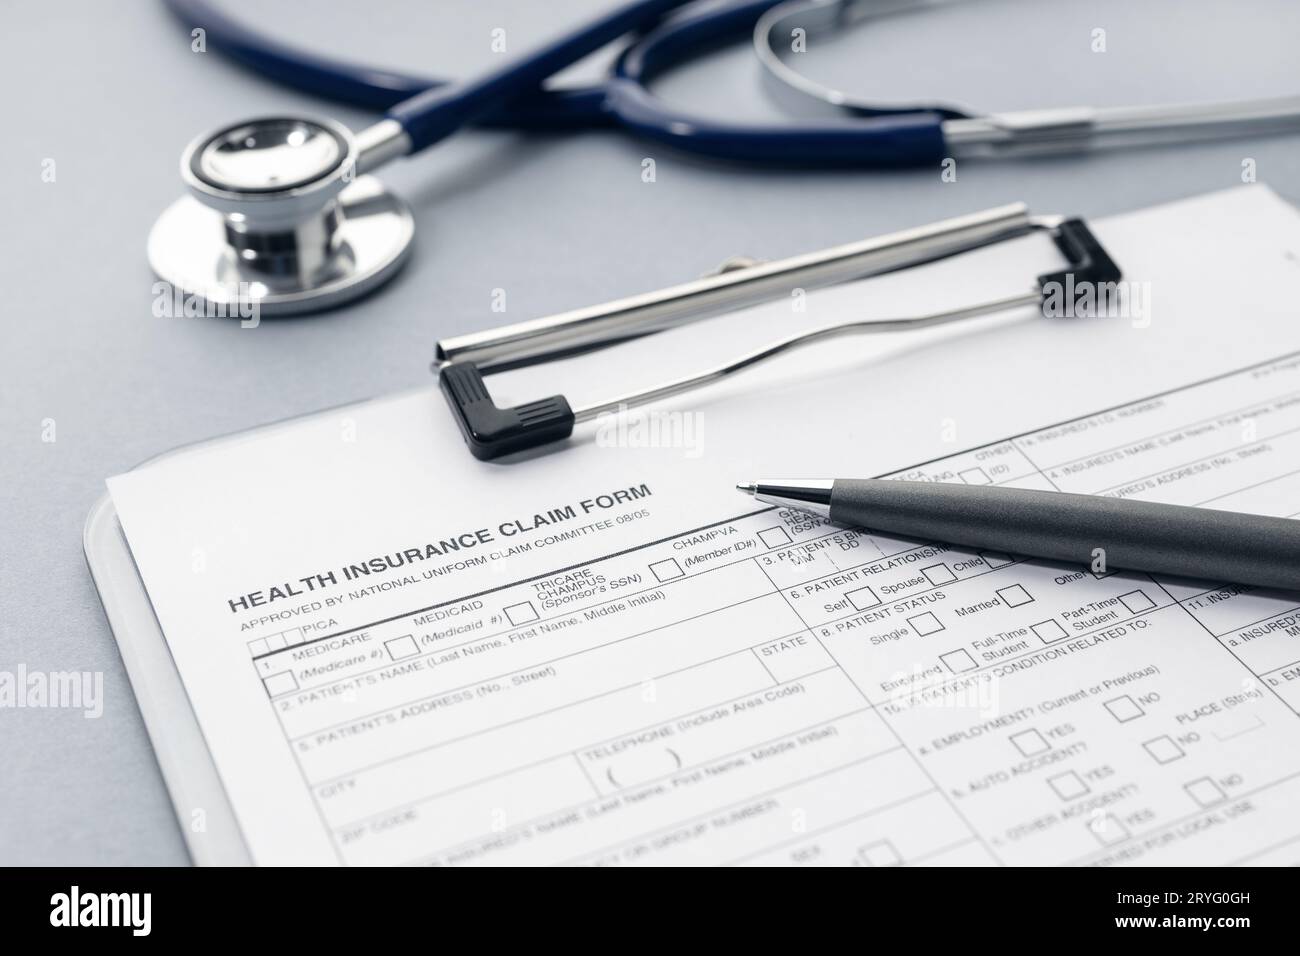 Health Insurance claim form and stethoscope on desk Stock Photo